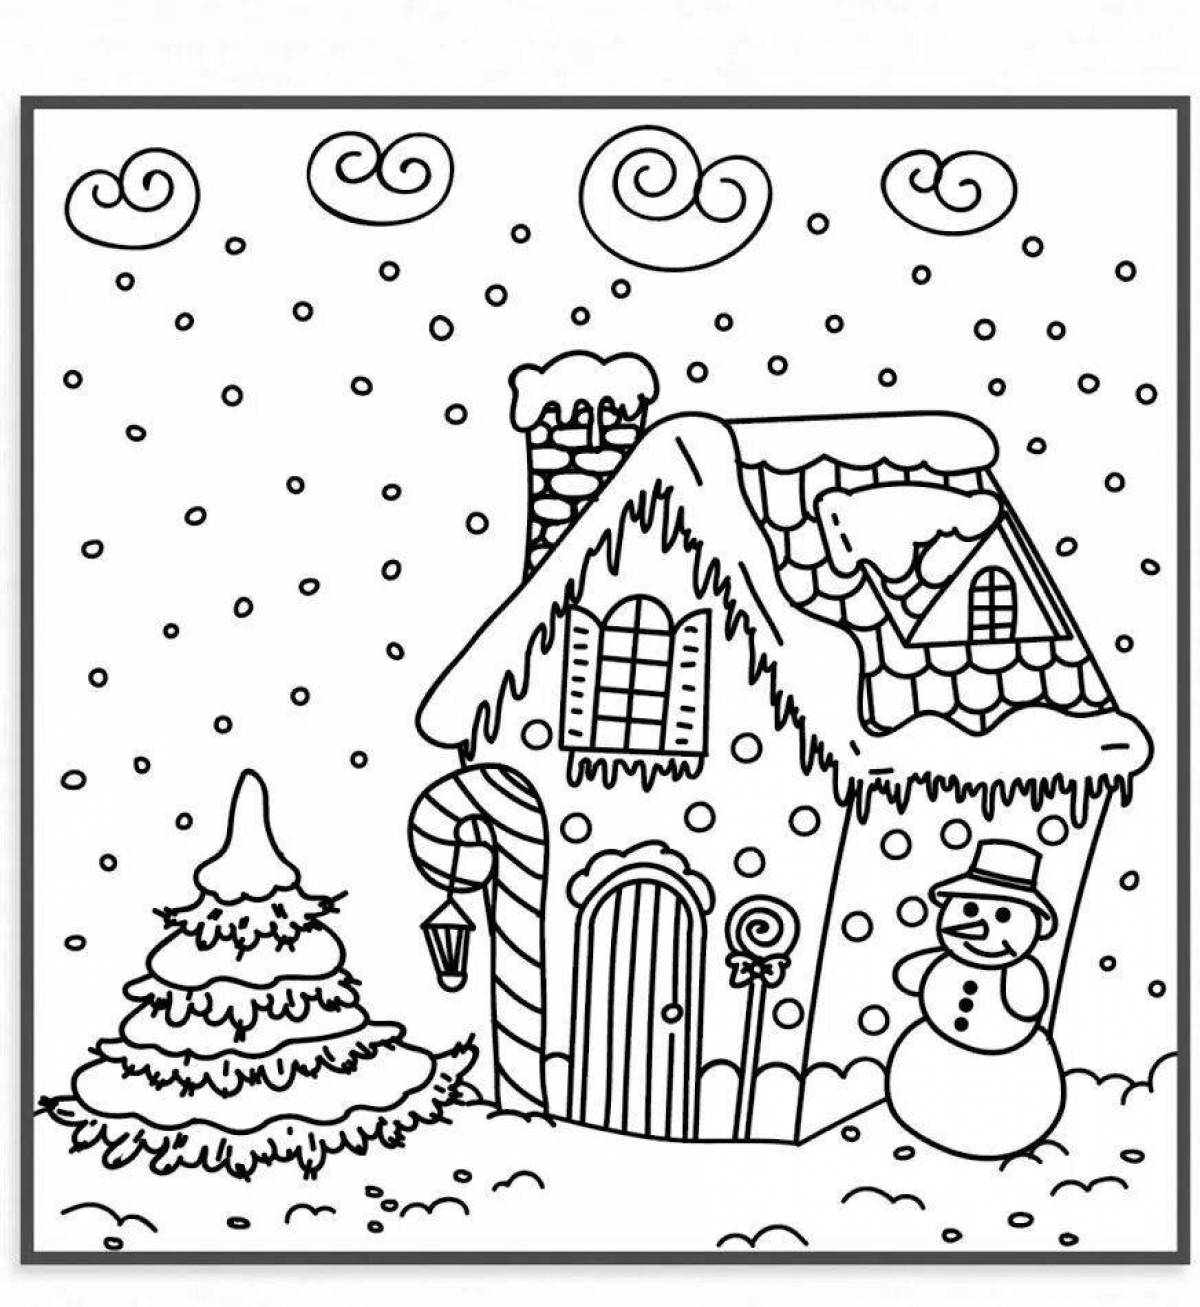 Radiant coloring page christmas gingerbread house